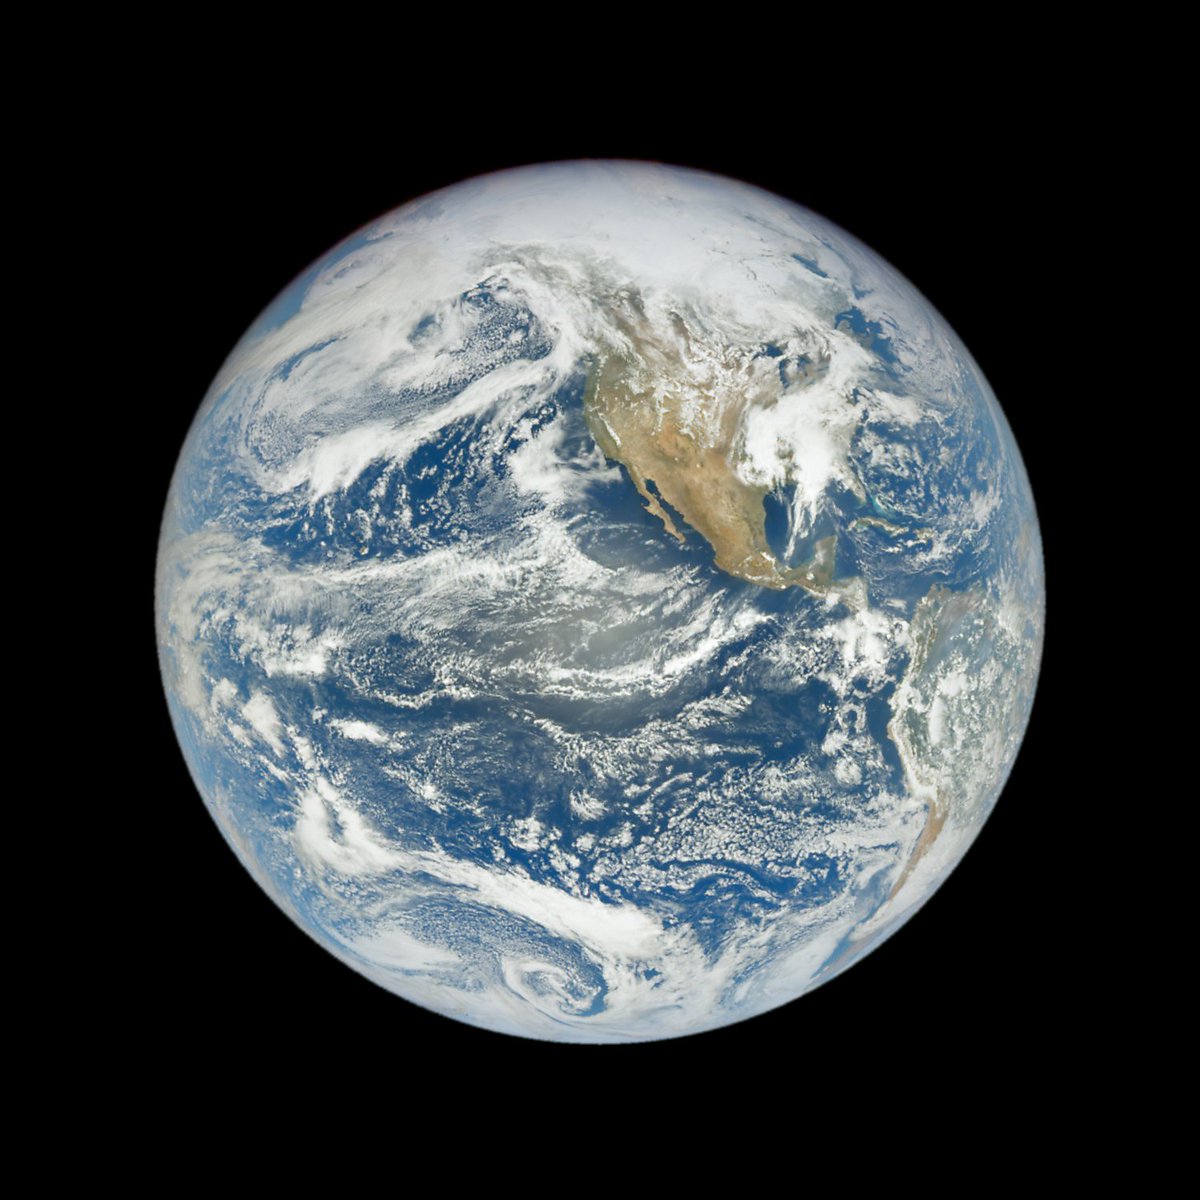 20:01 on Wednesday April 10th, over the North Pacific Ocean